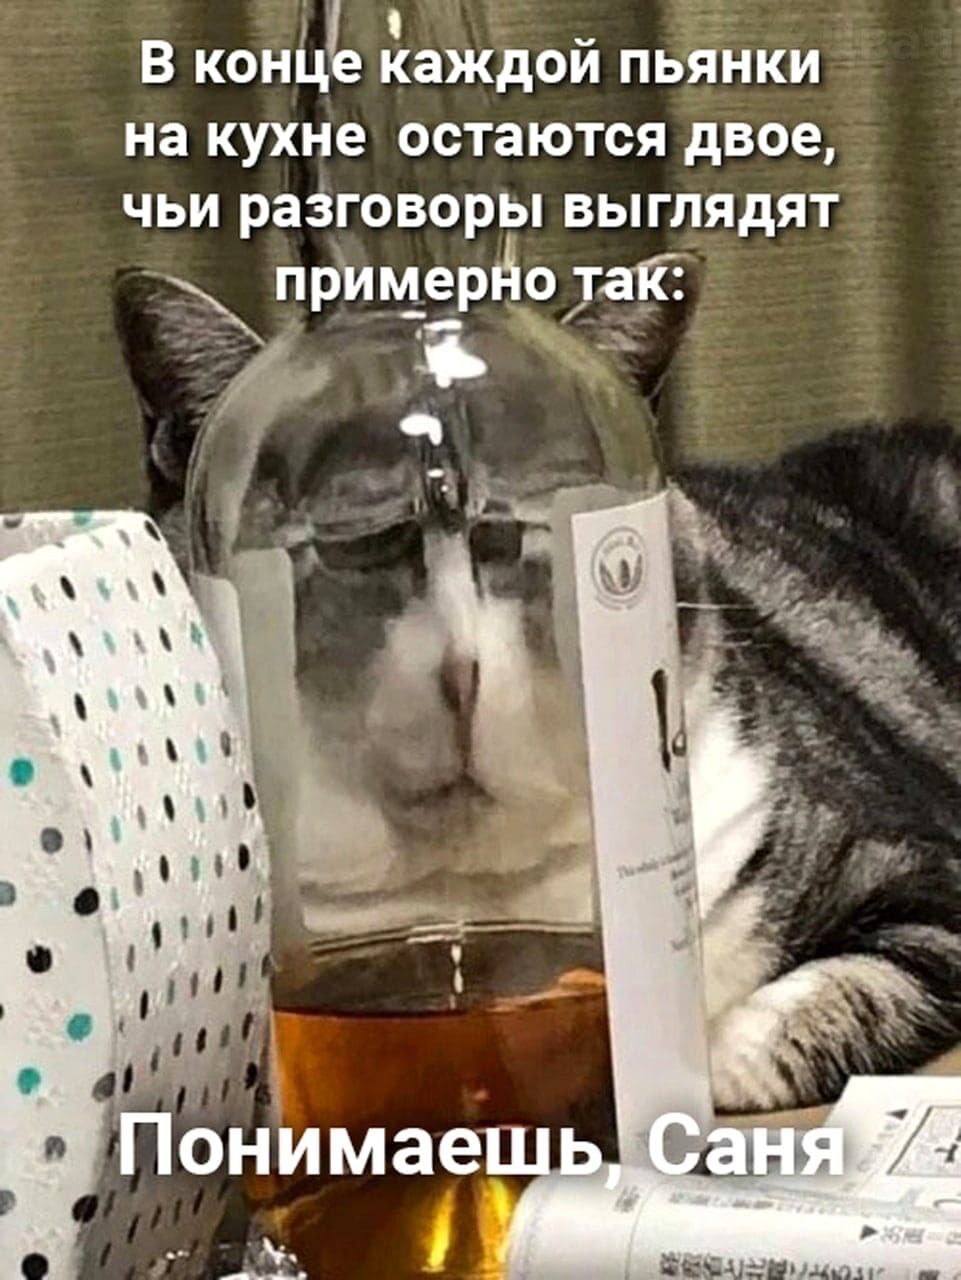 philosophical - Funny, From the network, Picture with text, Strange humor, cat, Longpost